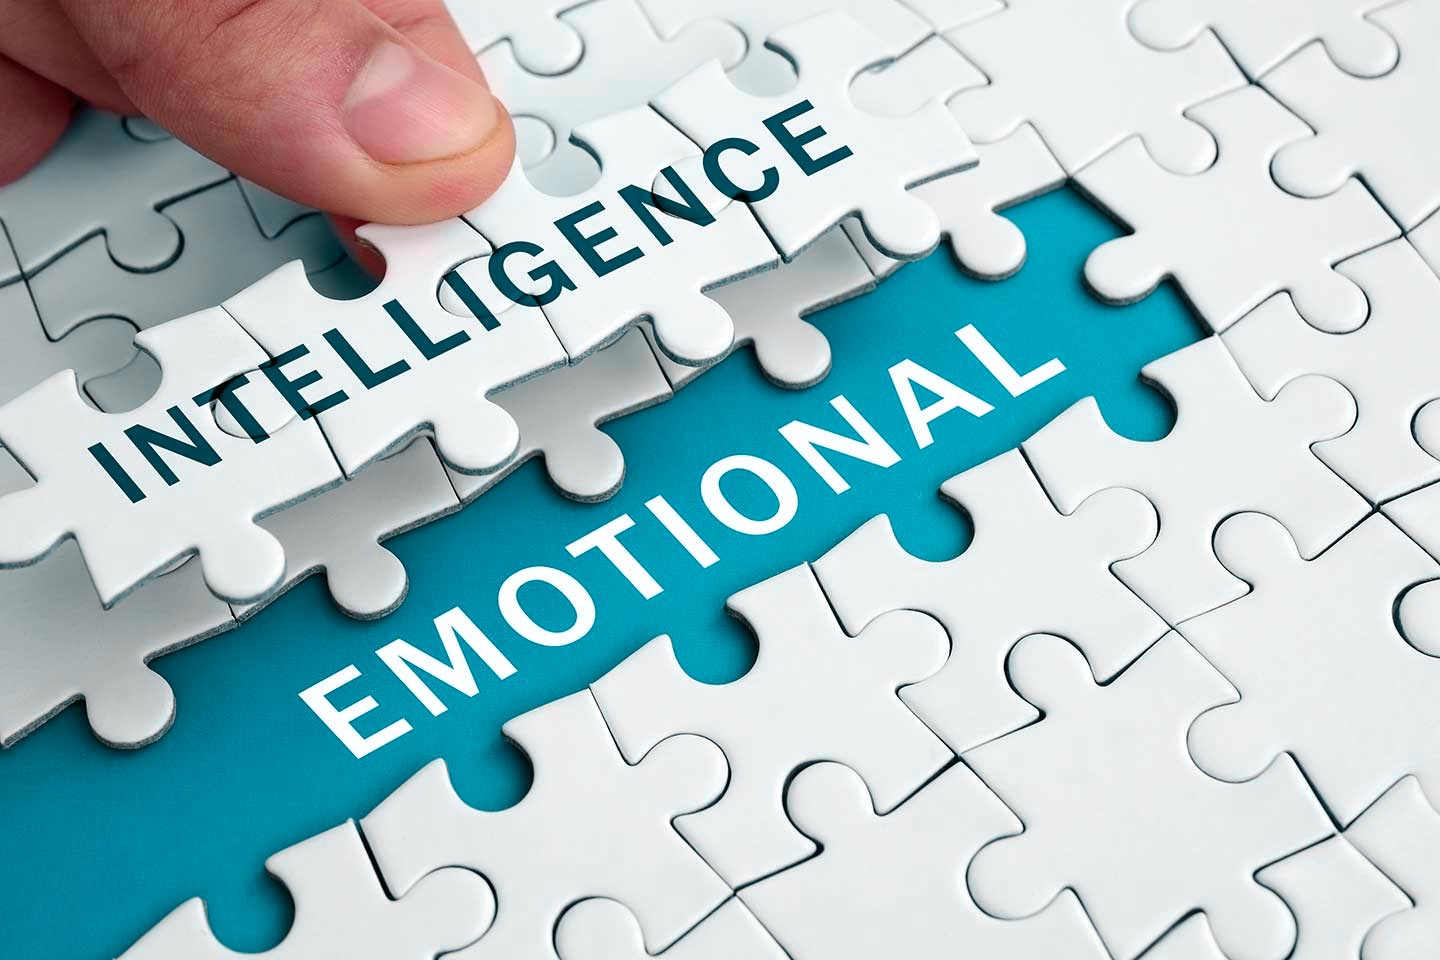 A Leader’s Guide To Emotional Intelligence (Part 2)